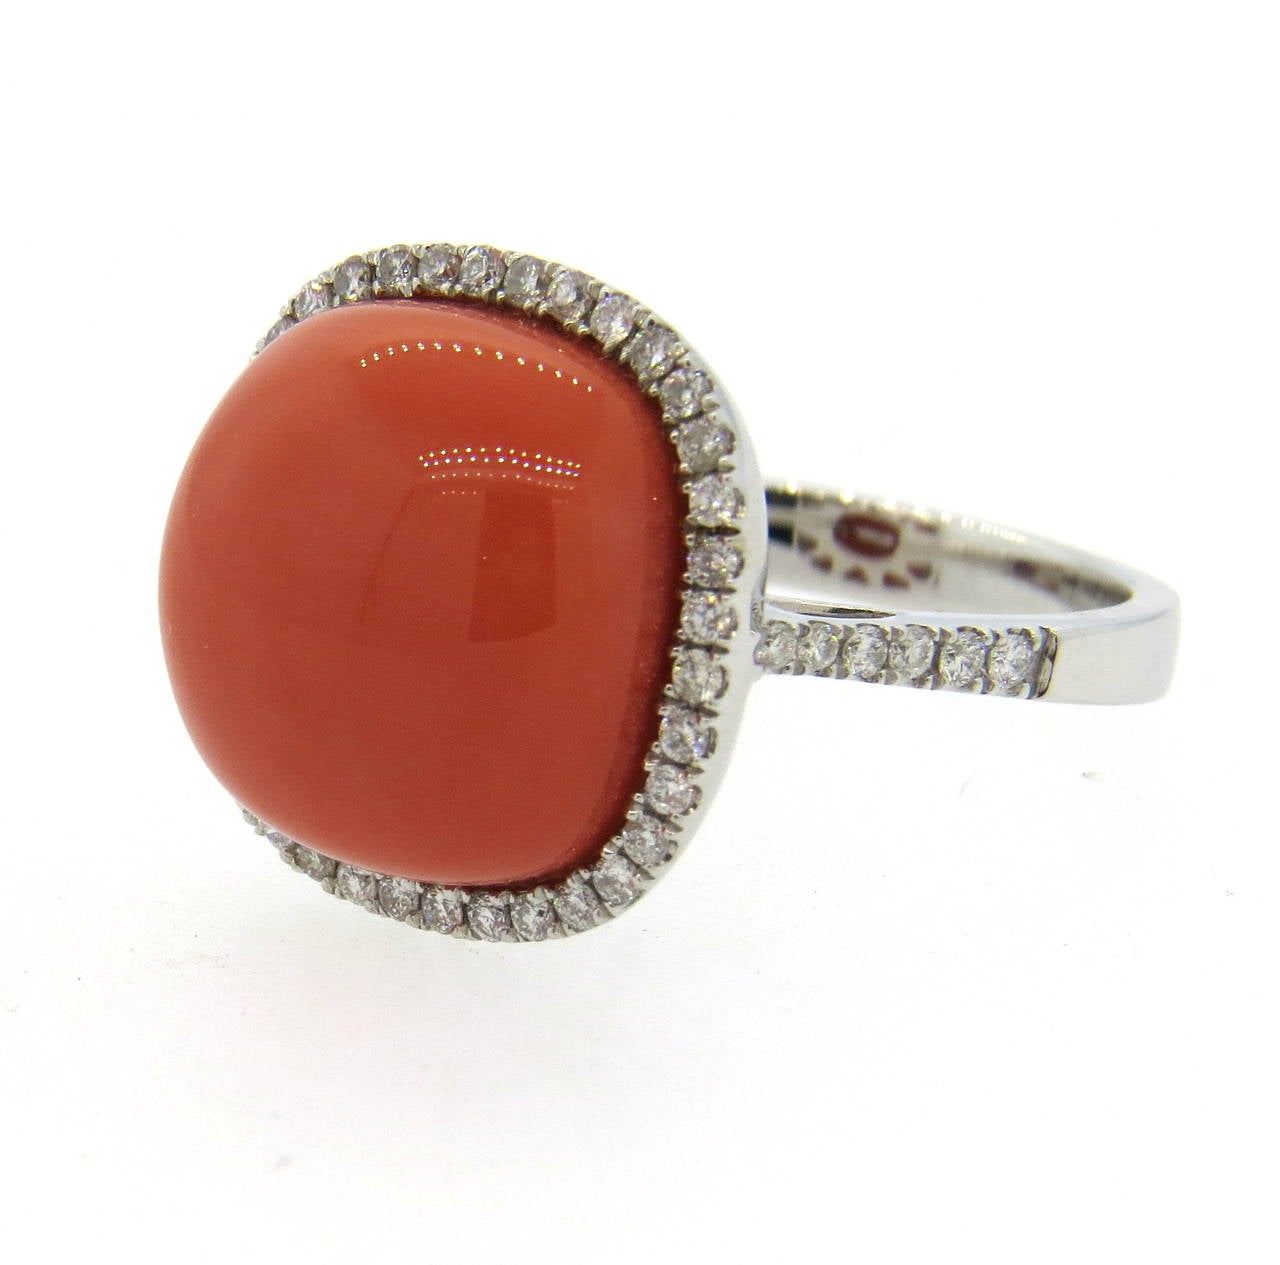 18k white gold ring, featuring coral  gemstones, surrounded with approximately 0.57ctw in diamonds. Ring is a size 7, ring top is 16mm x 16mm. Weight of the piece - 7.8 grams